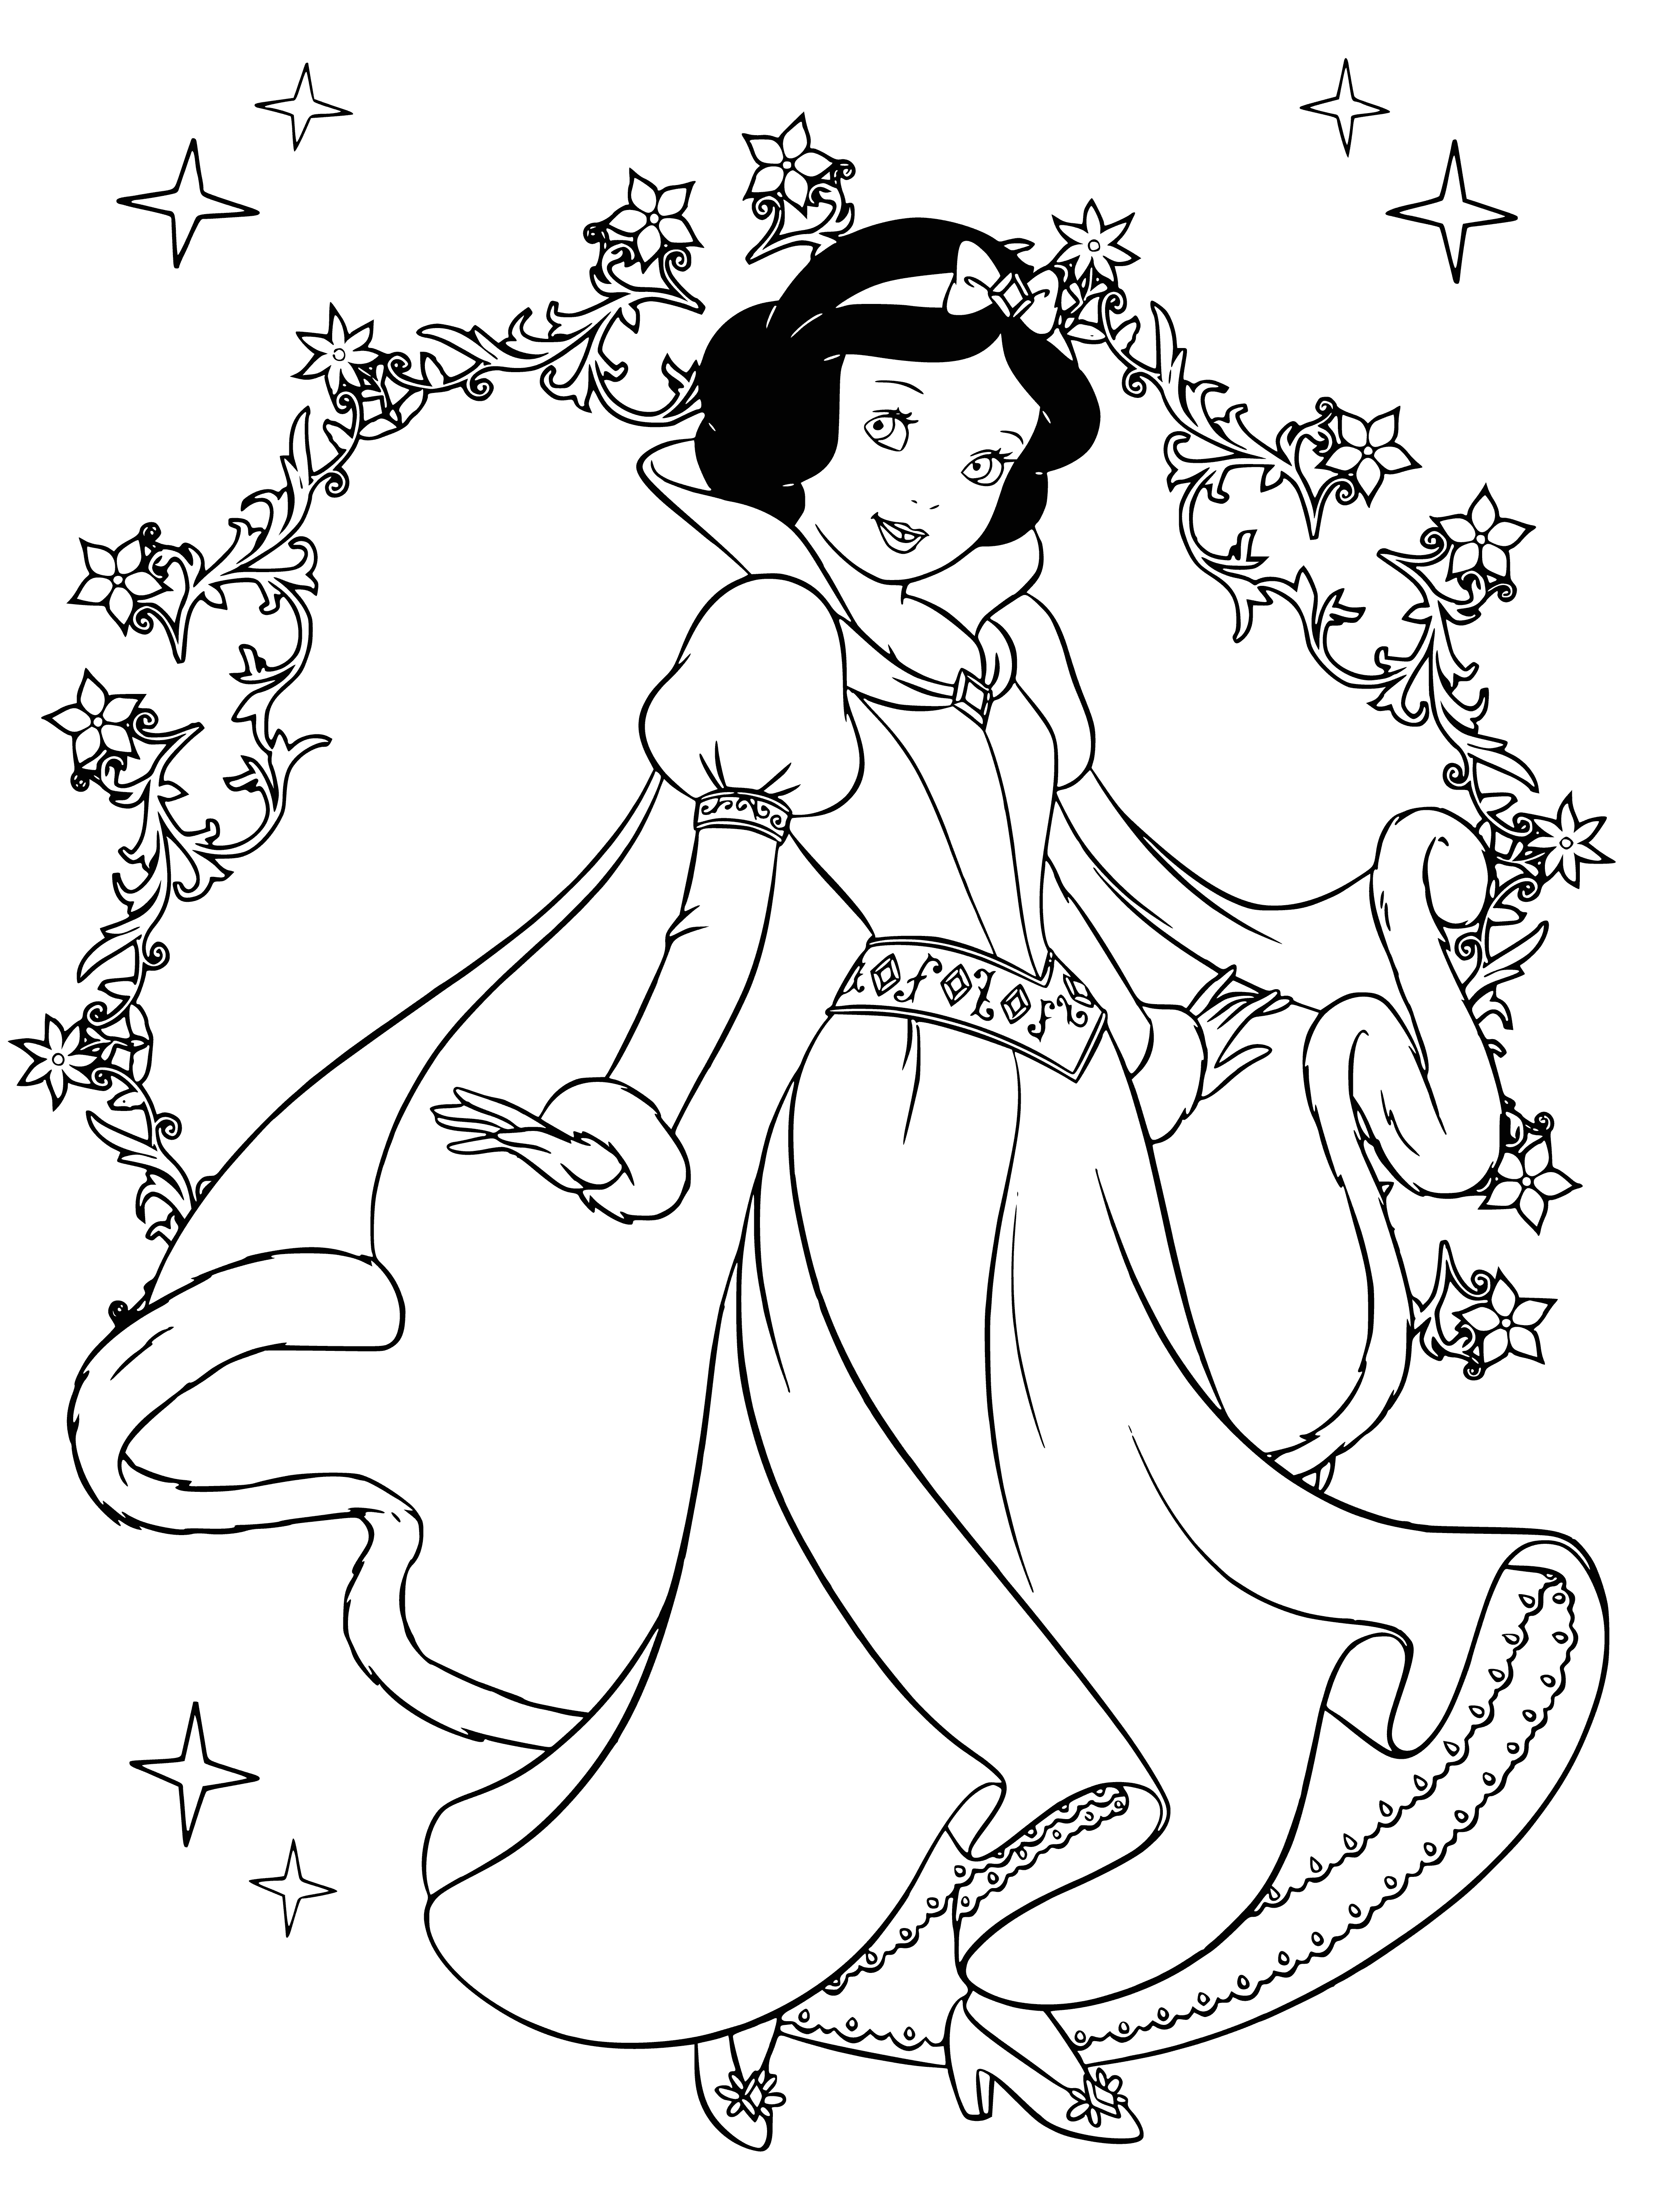 coloring page: Disney princesses Snow White, Cinderella & Sleeping Beauty smile while holding hands & blowing out candles on a large cake.